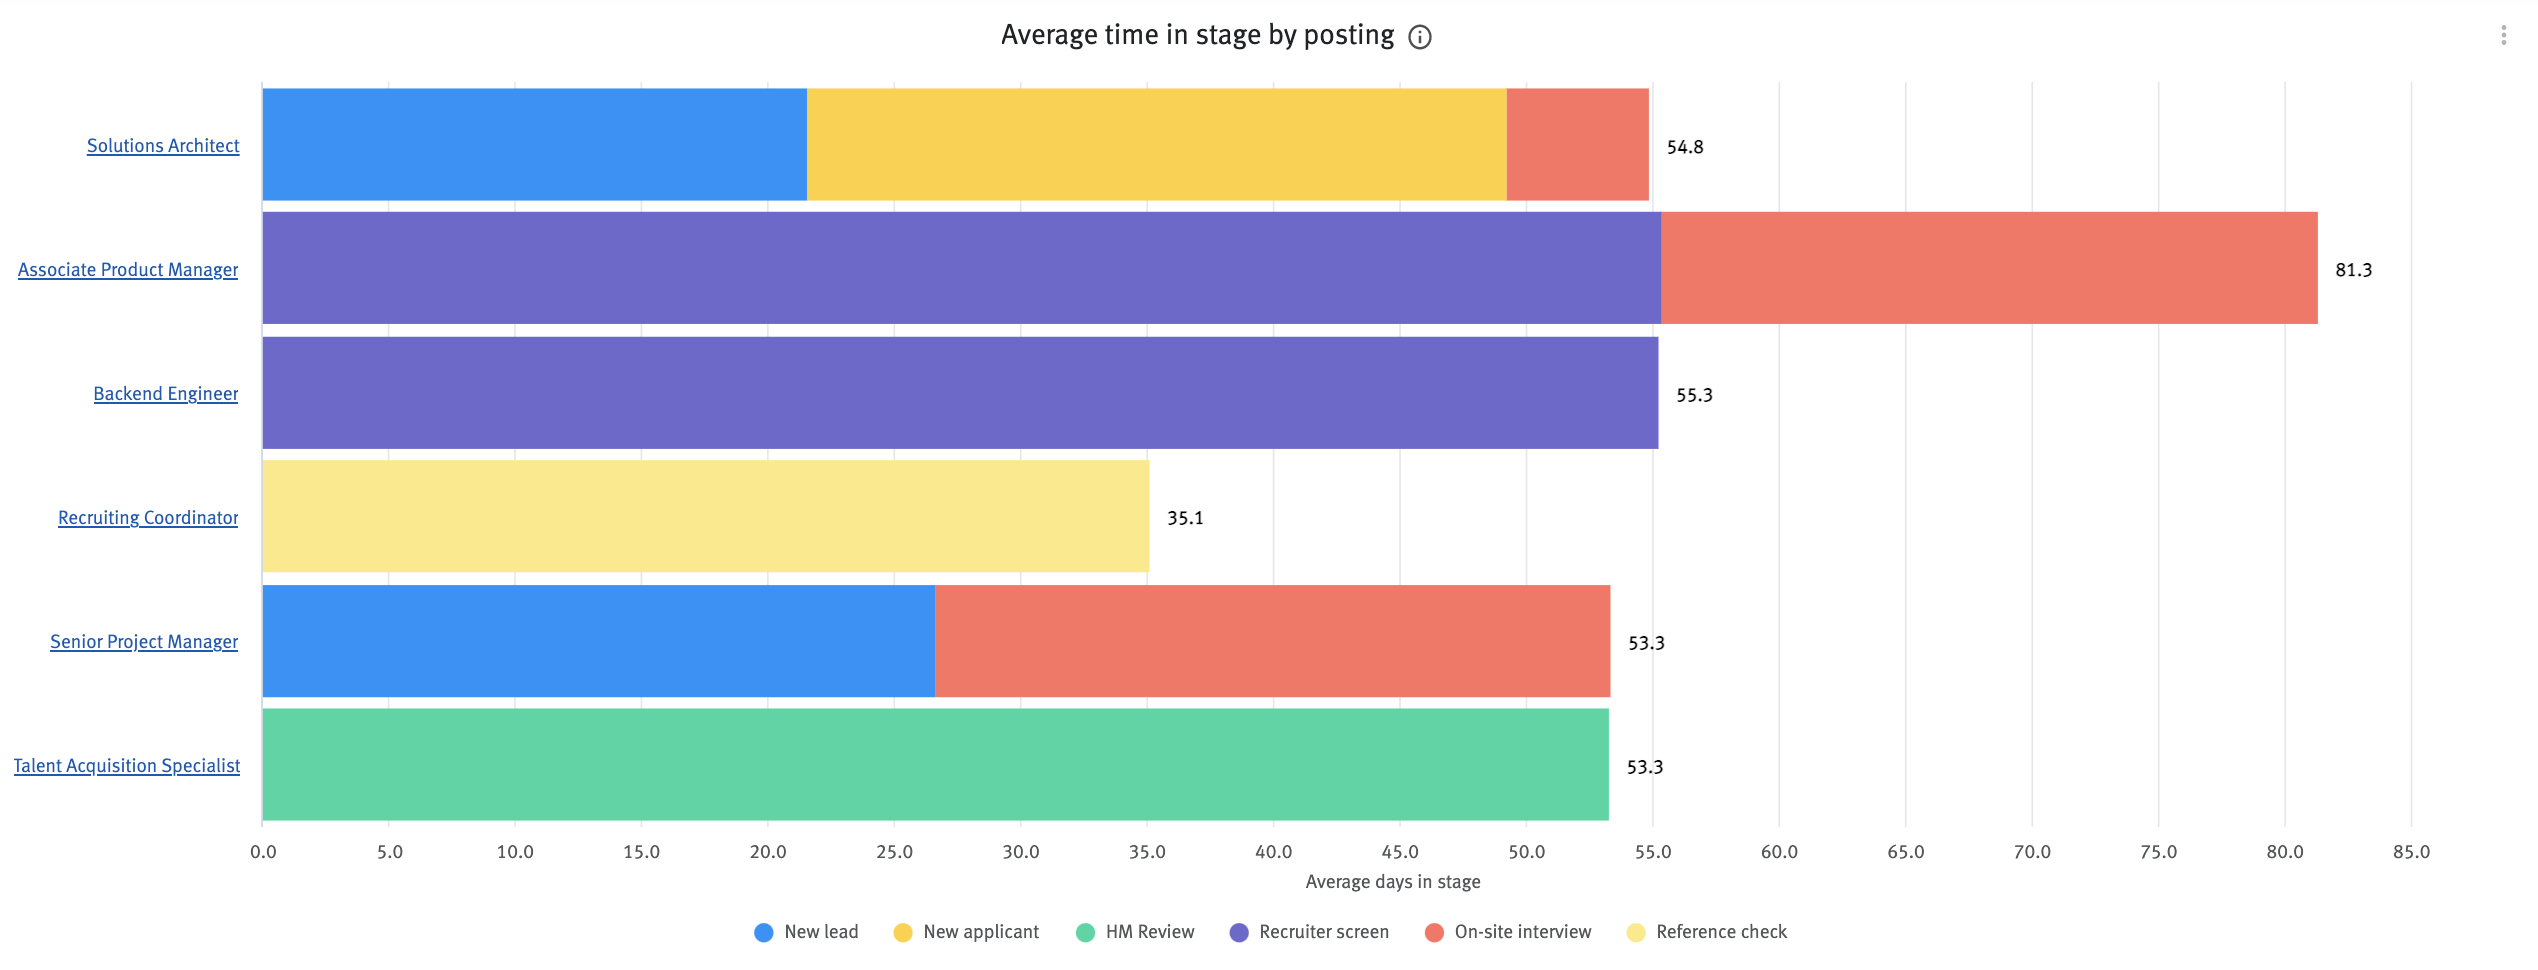 Average time in stage by posting chart